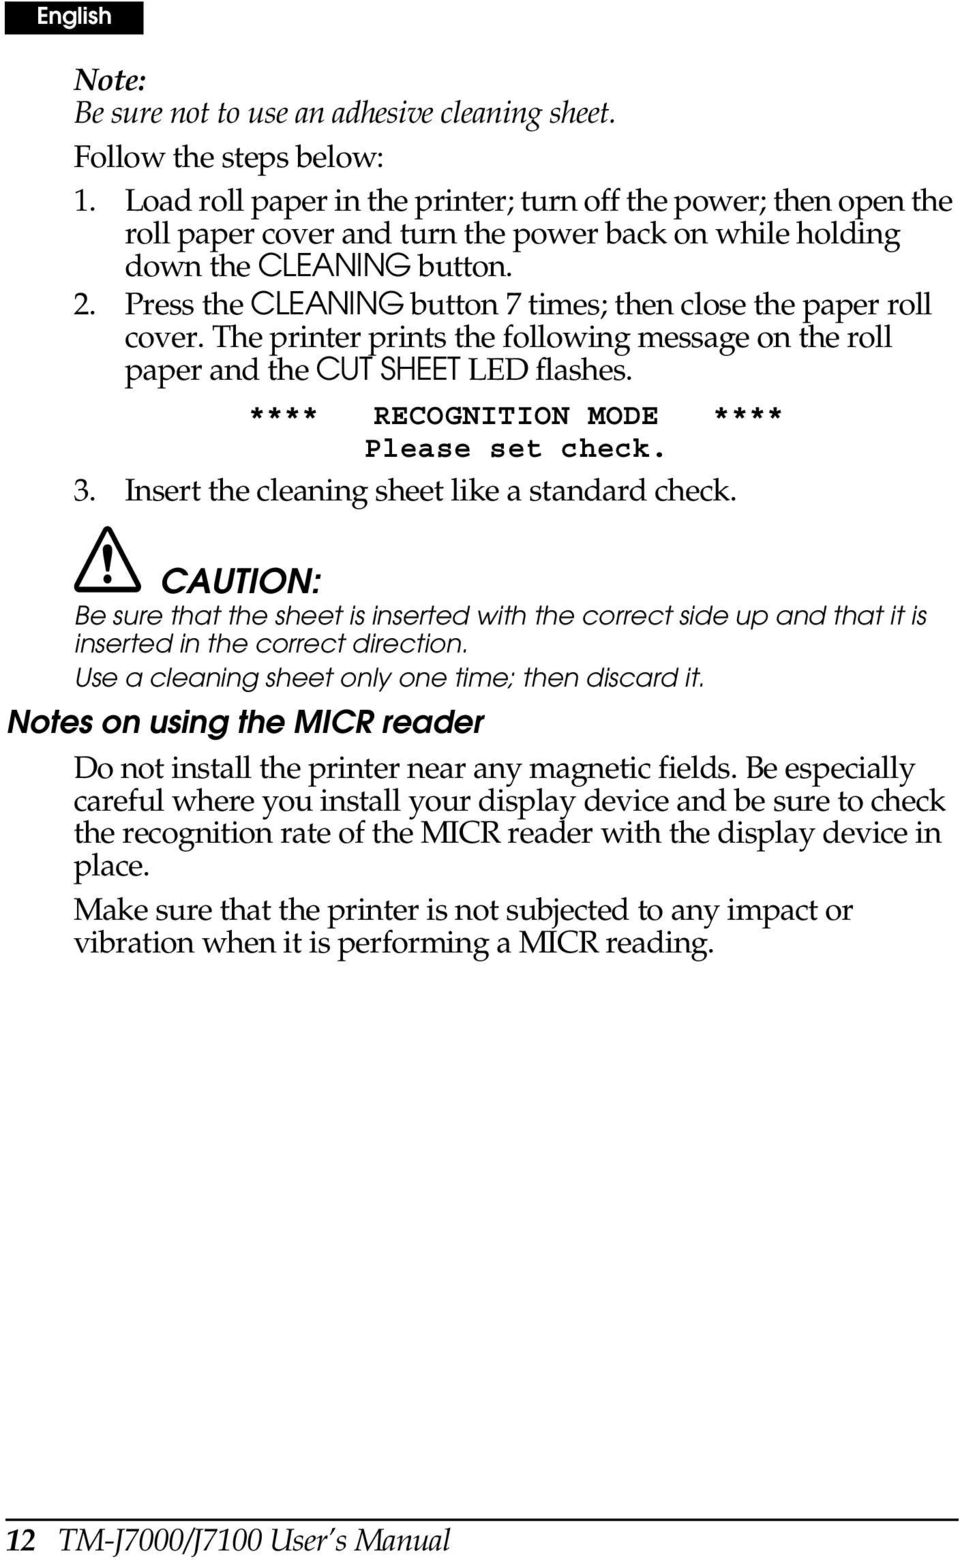 Press the CLEANING button 7 times; then close the paper roll cover. The printer prints the following message on the roll paper and the CUT SHEET LED flashes.